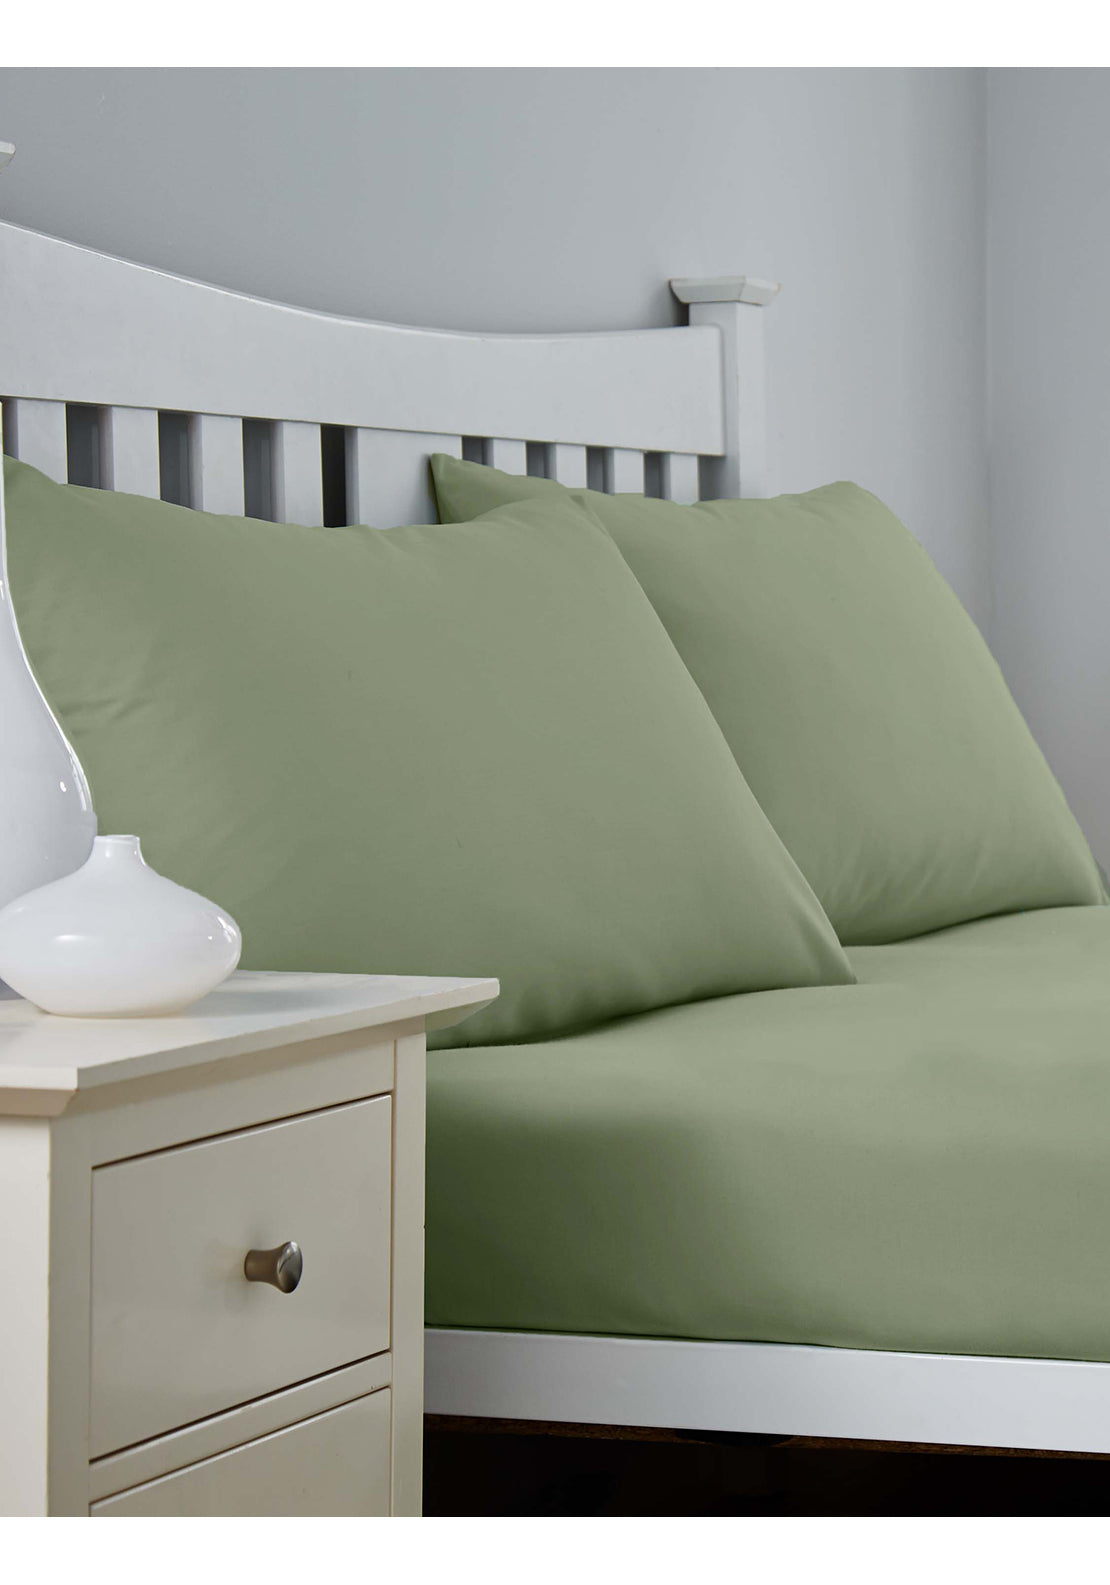 The Home Collection 300 Thread Count Standard Pillowcase Pair - Green 1 Shaws Department Stores